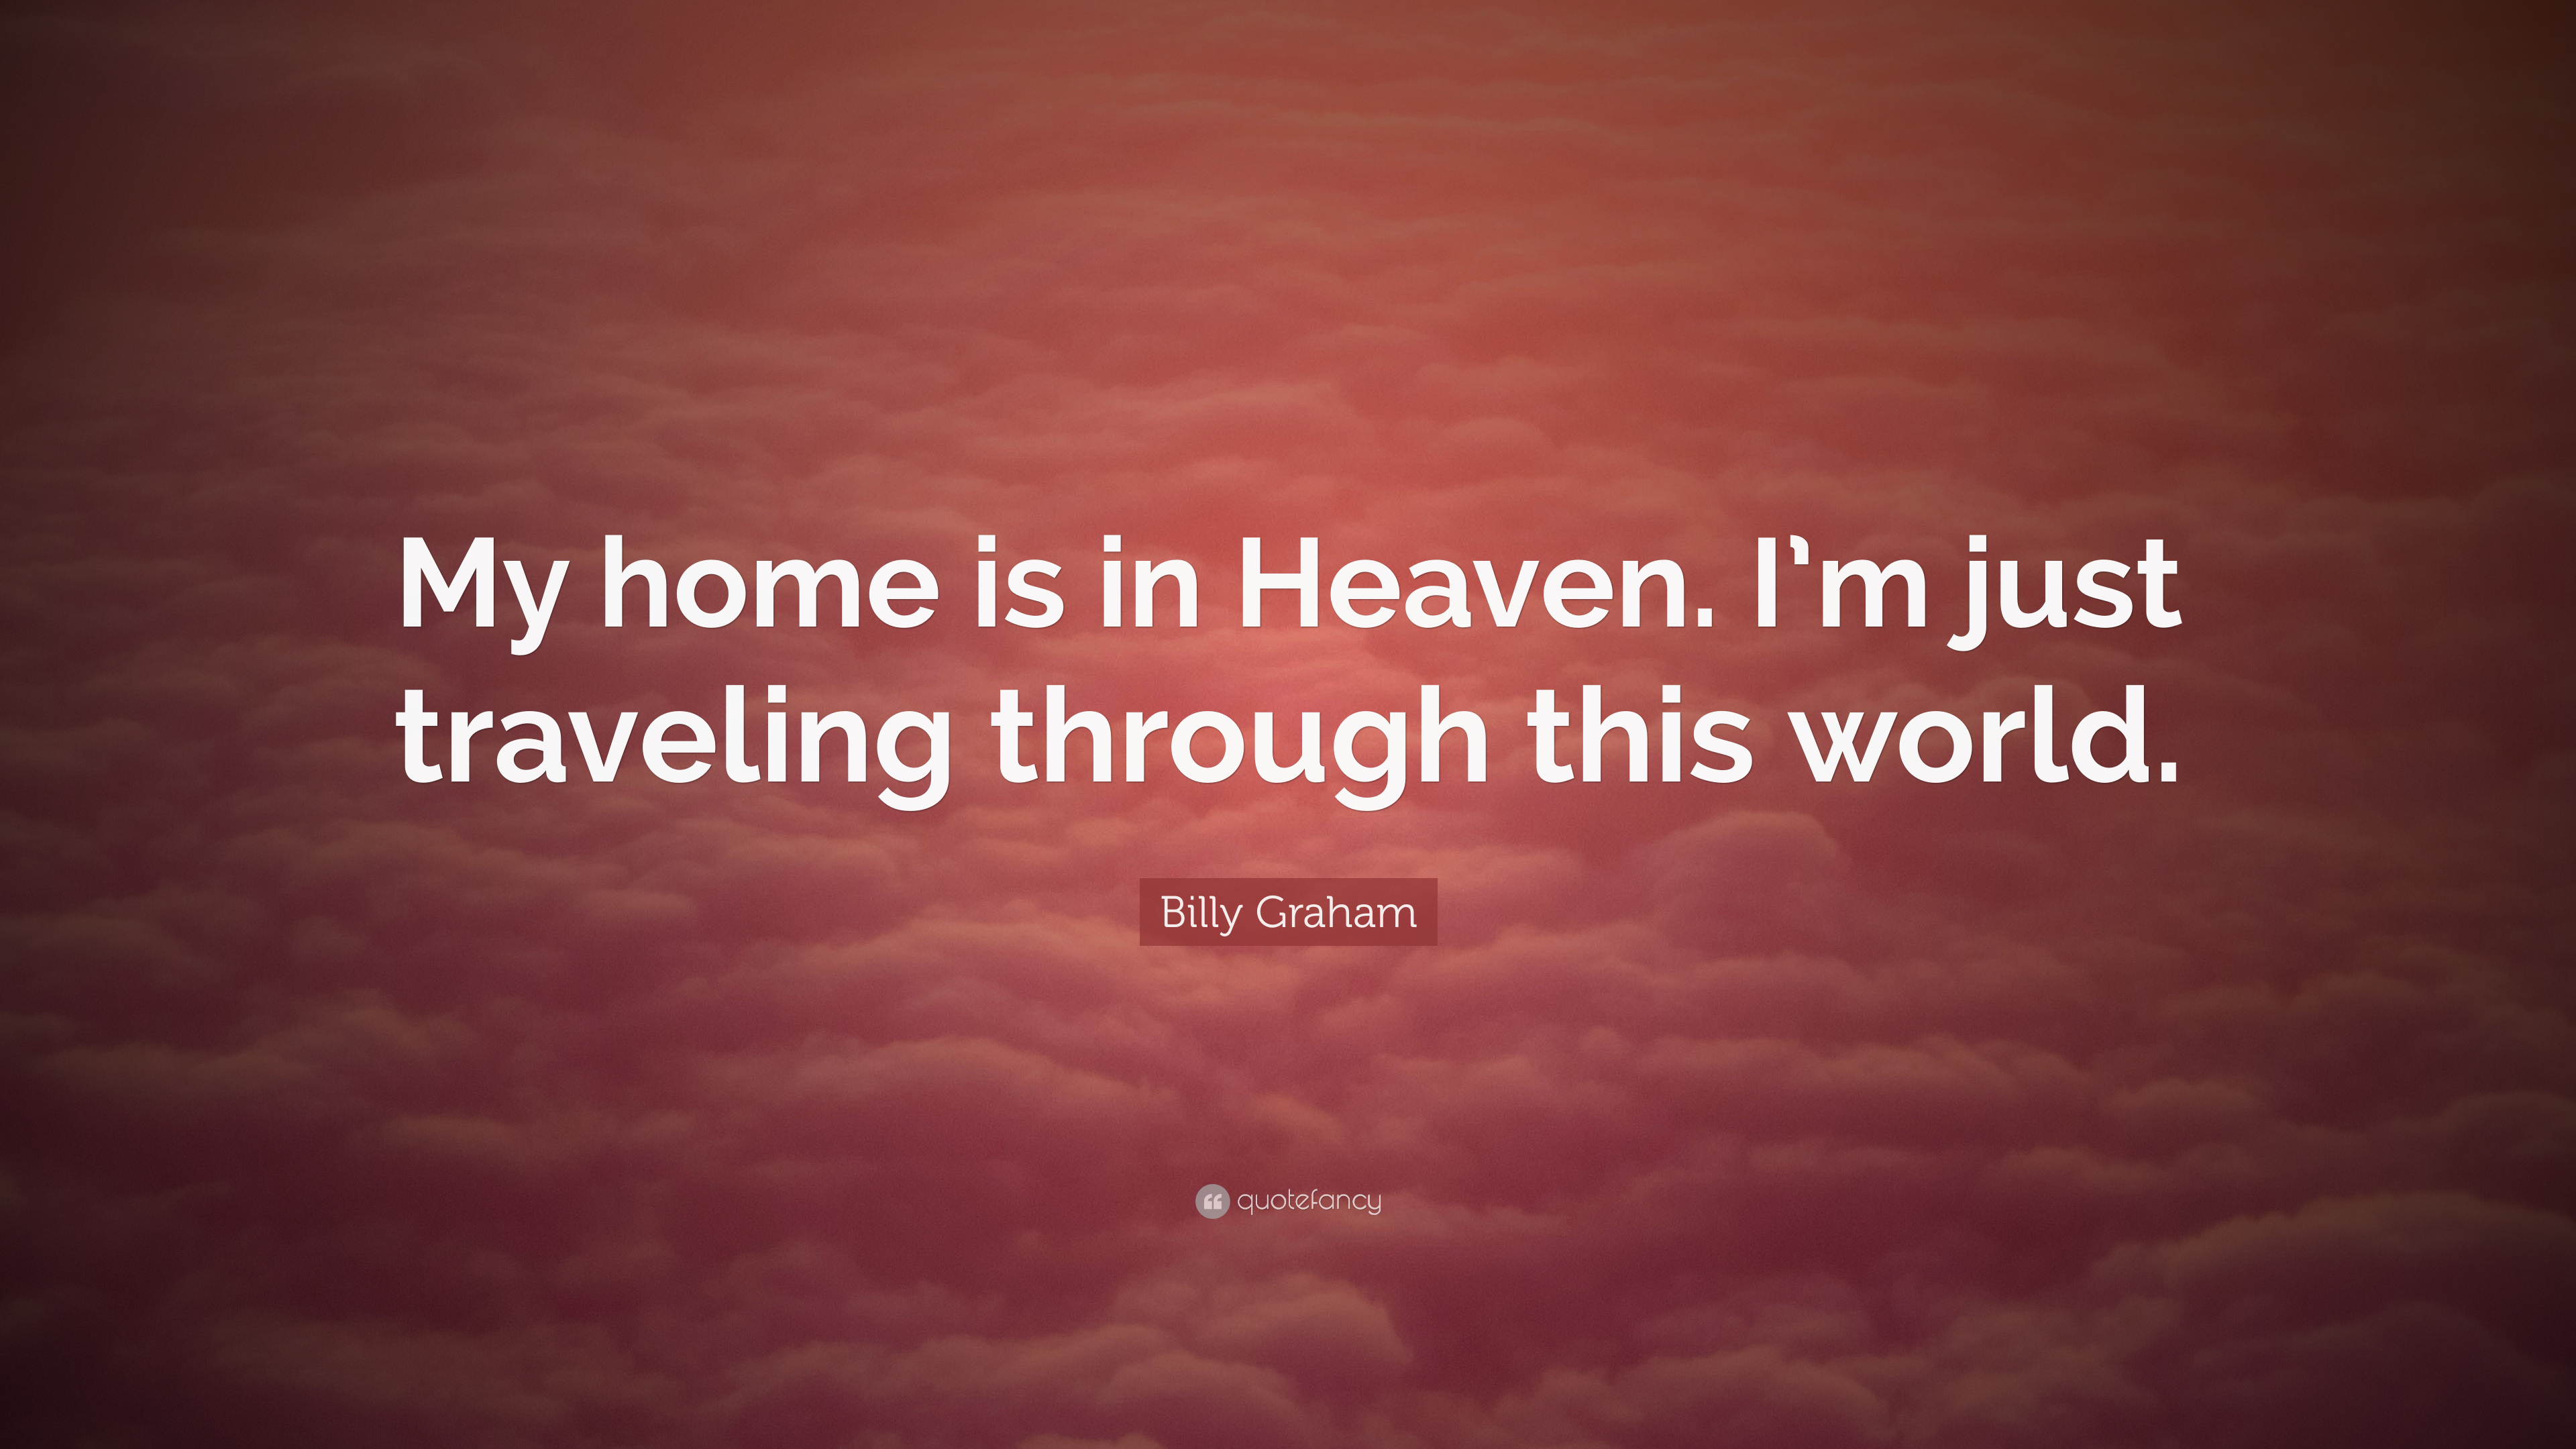 my home is in heaven. i’m just traveling through this world. billy graham